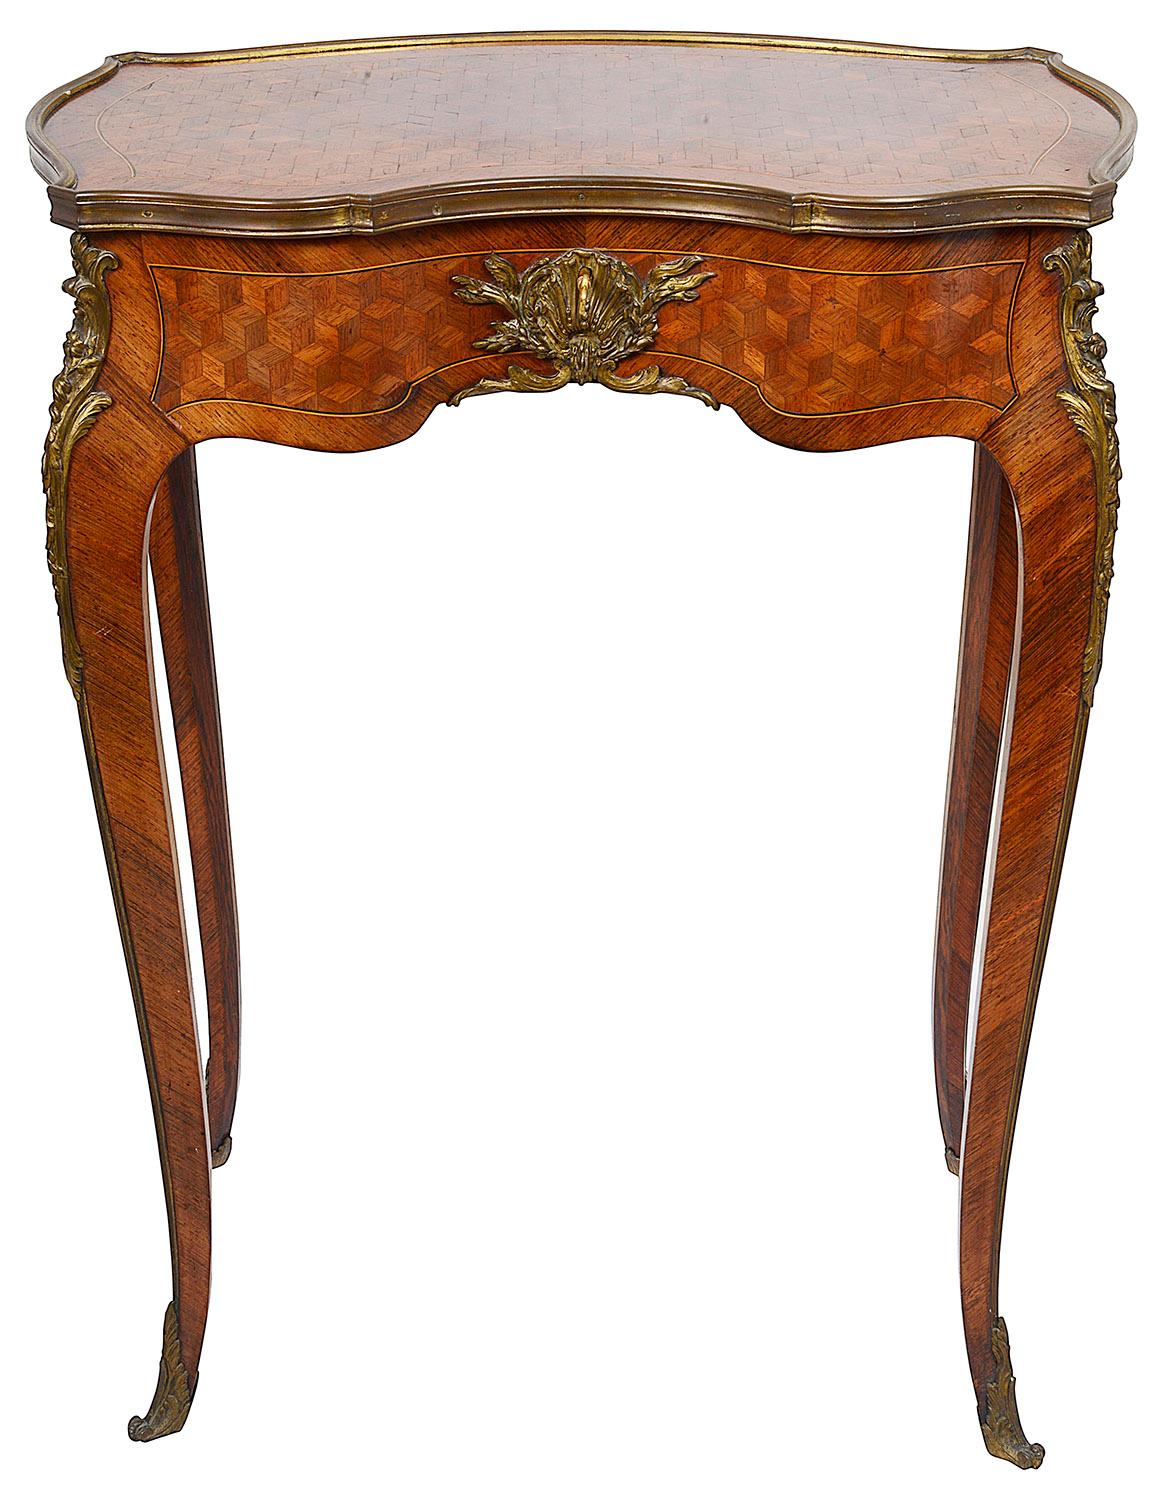 French 19th Century Parquetry Inlaid Side Table, Signed, Linke